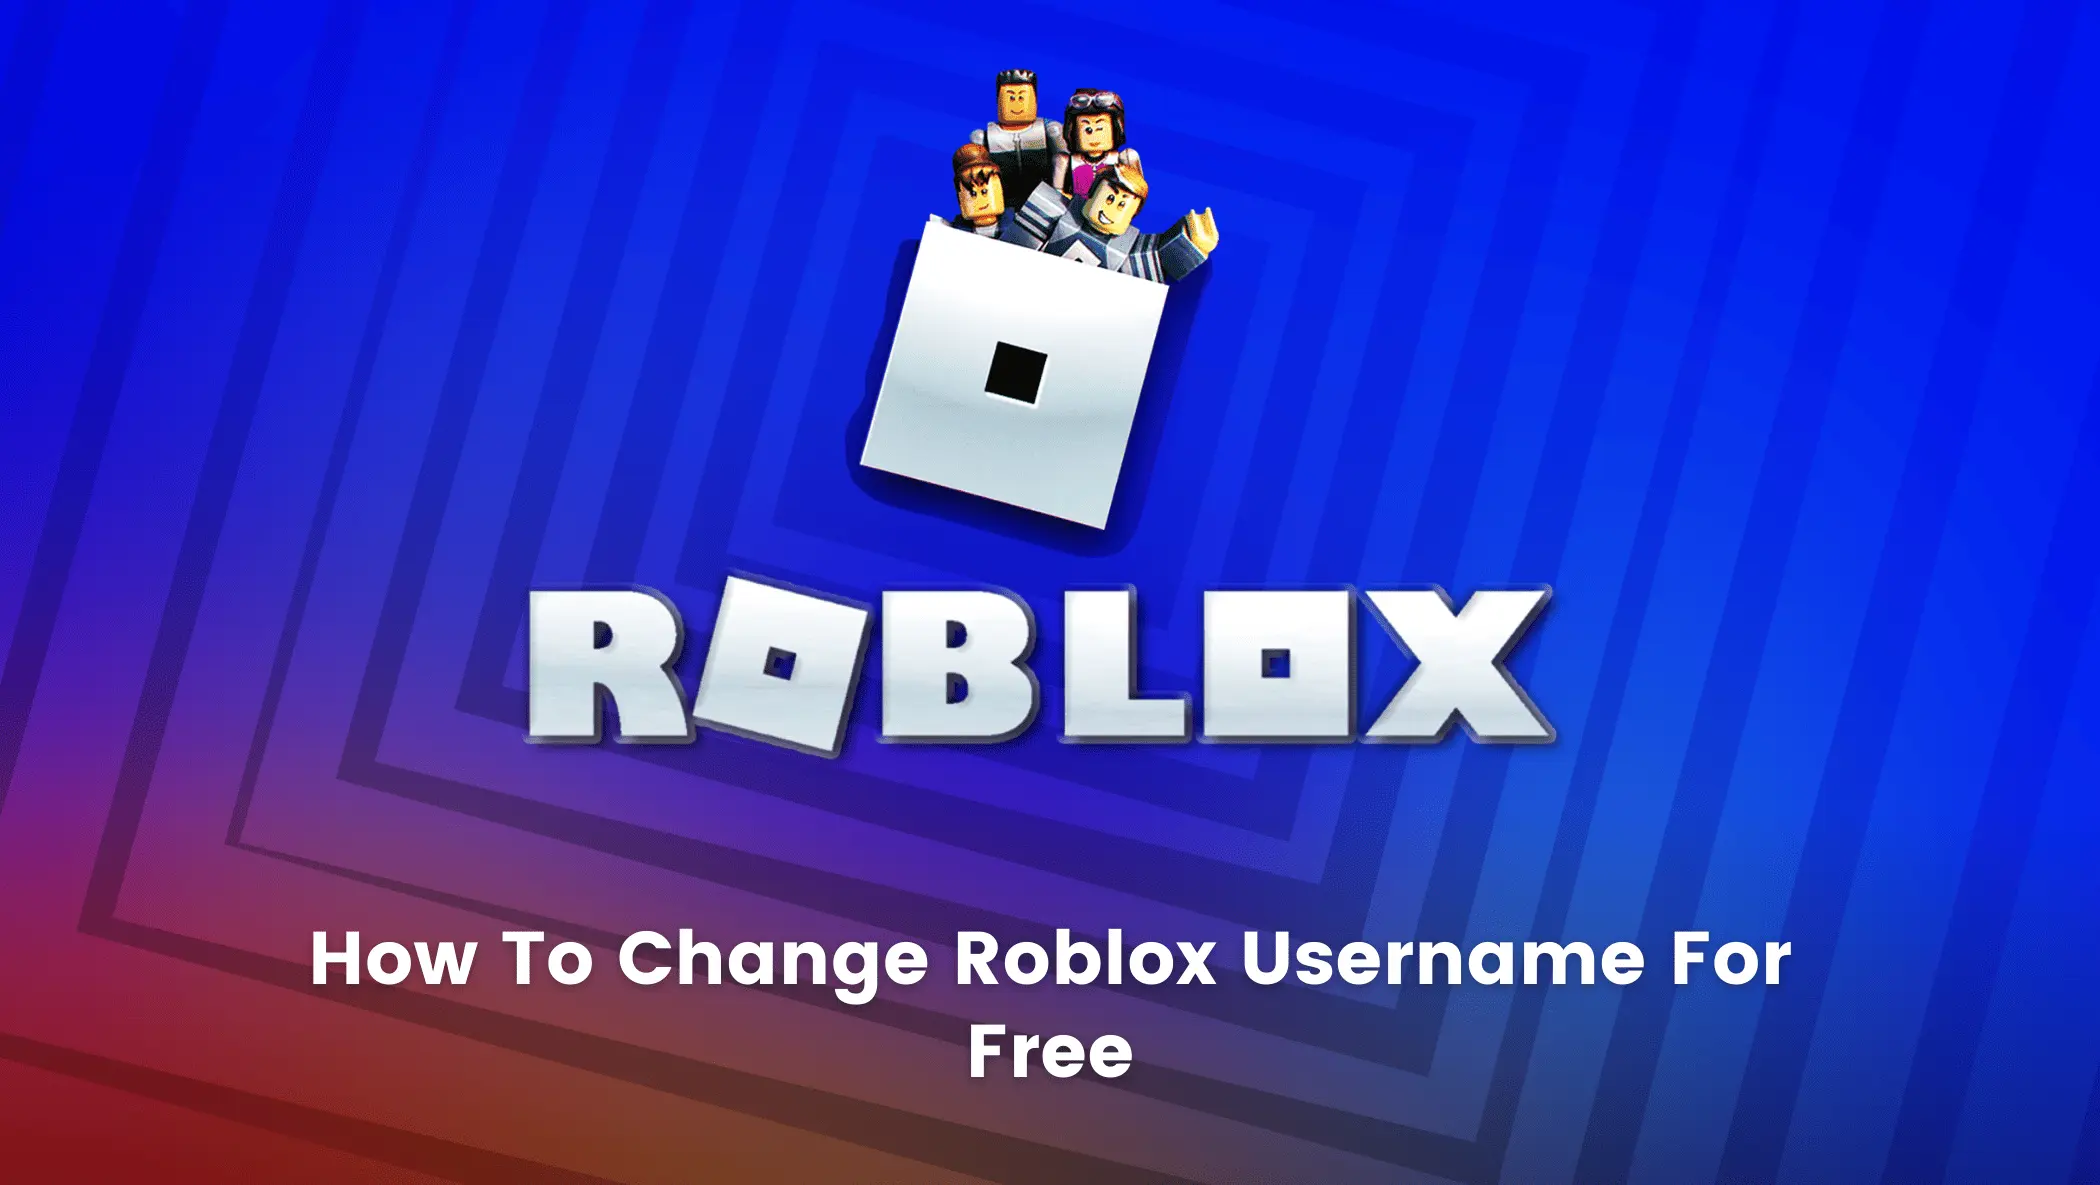 Here Is How To Change Roblox Username For Free In 2022 - BrightChamps Blog